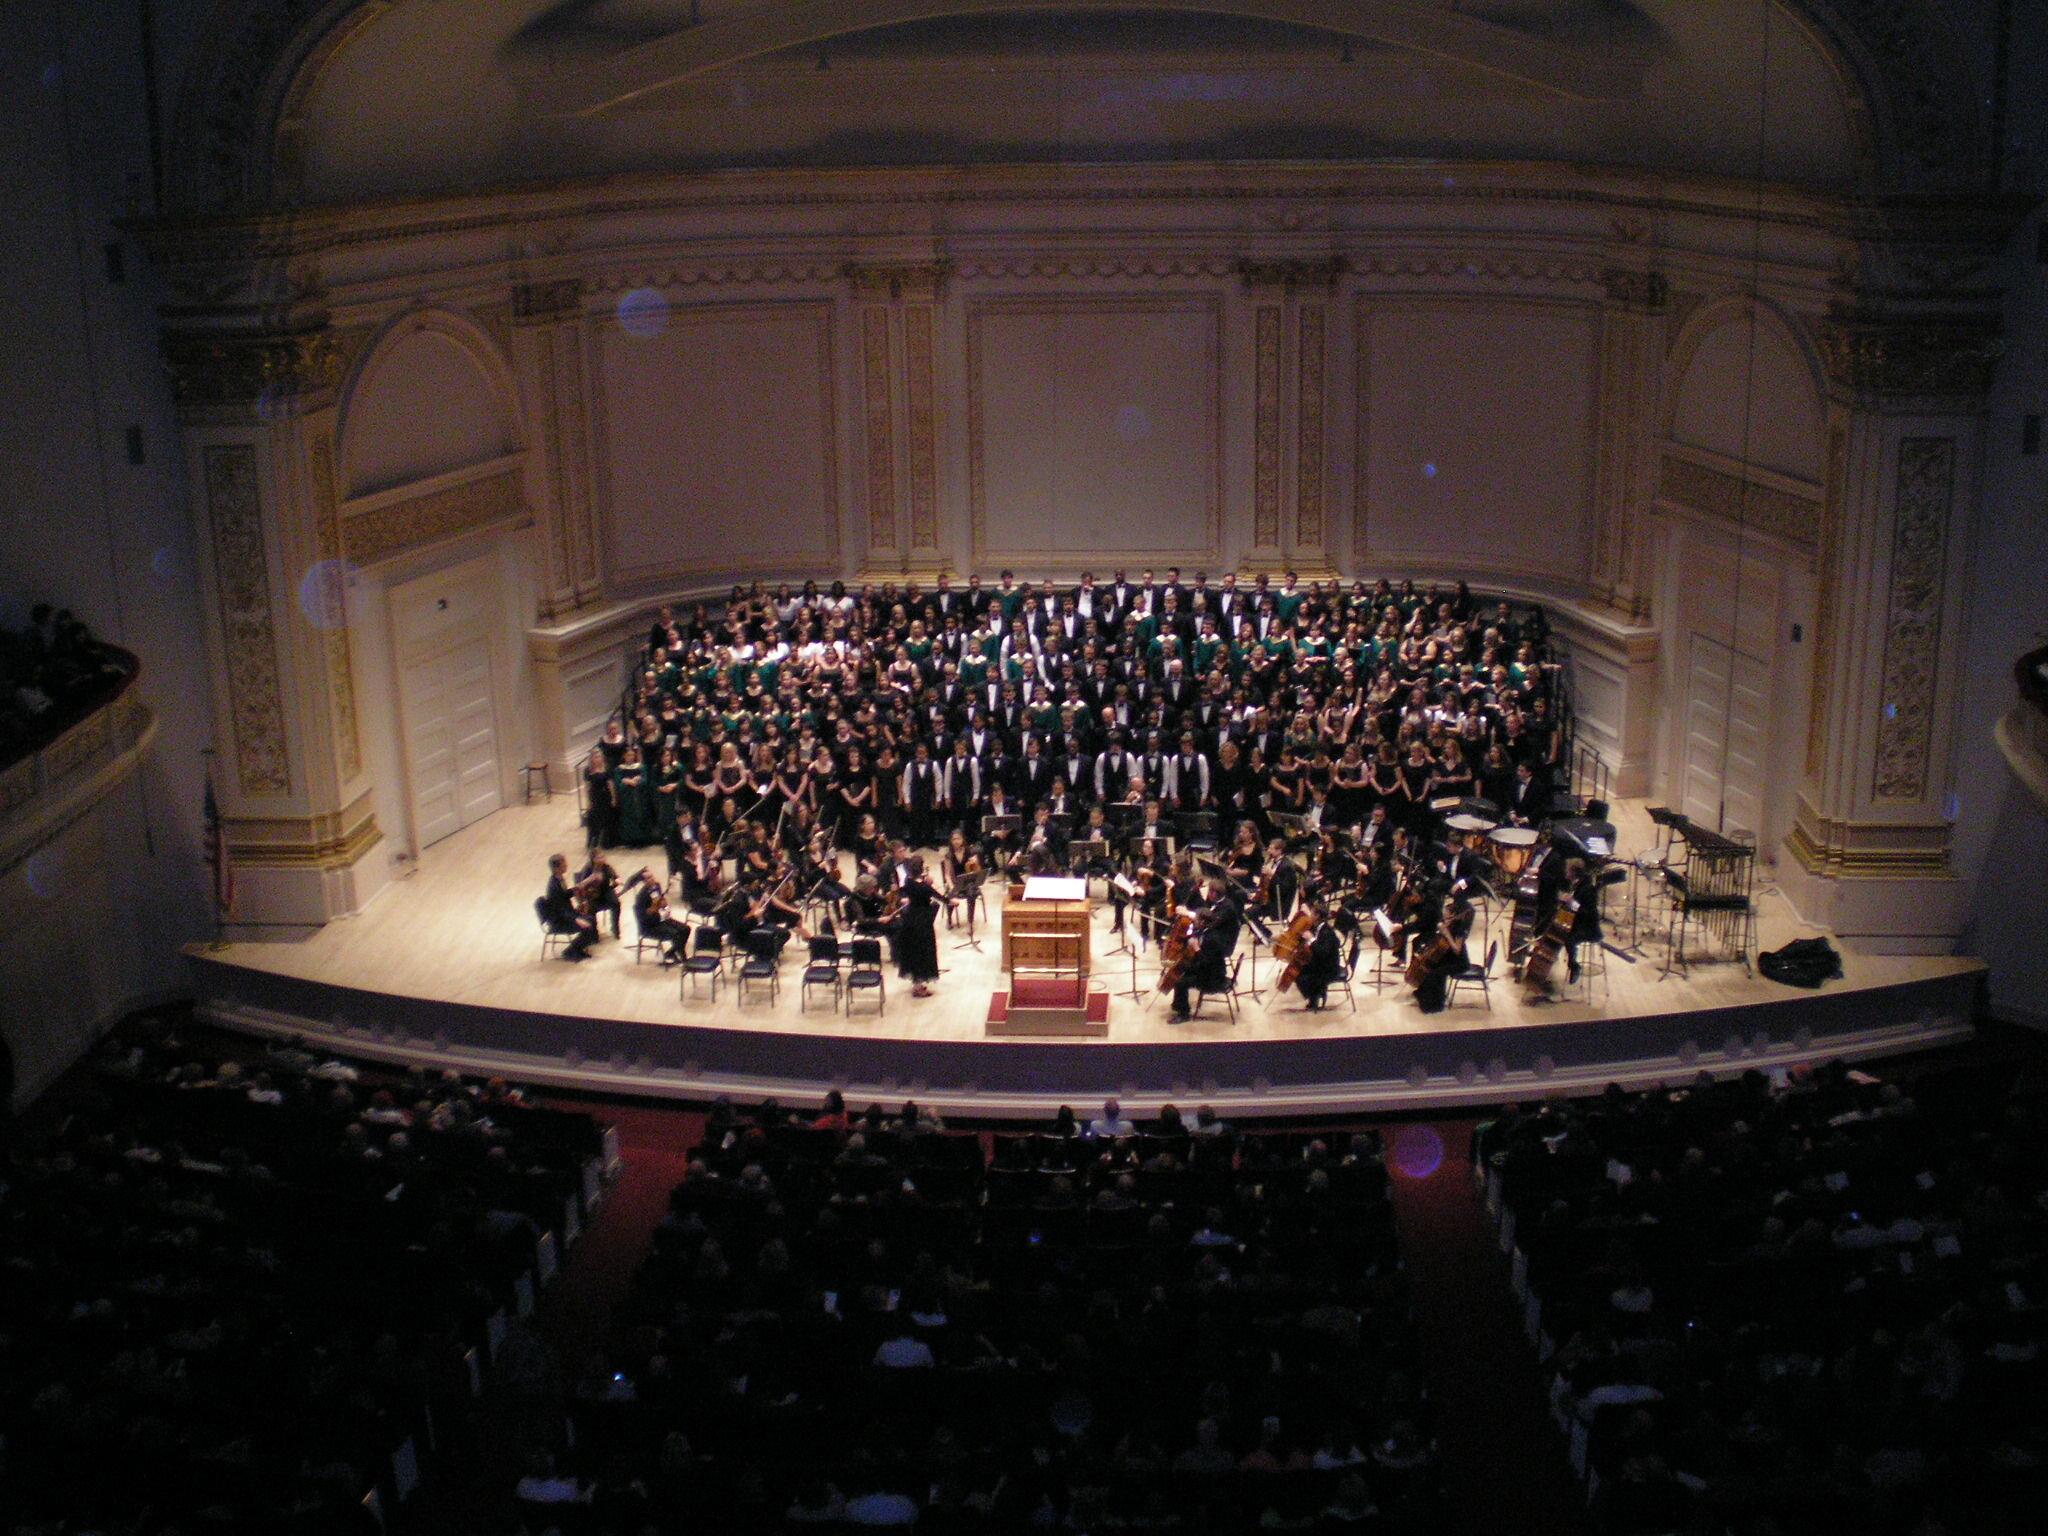 as concertmistress at Carnegie Hall